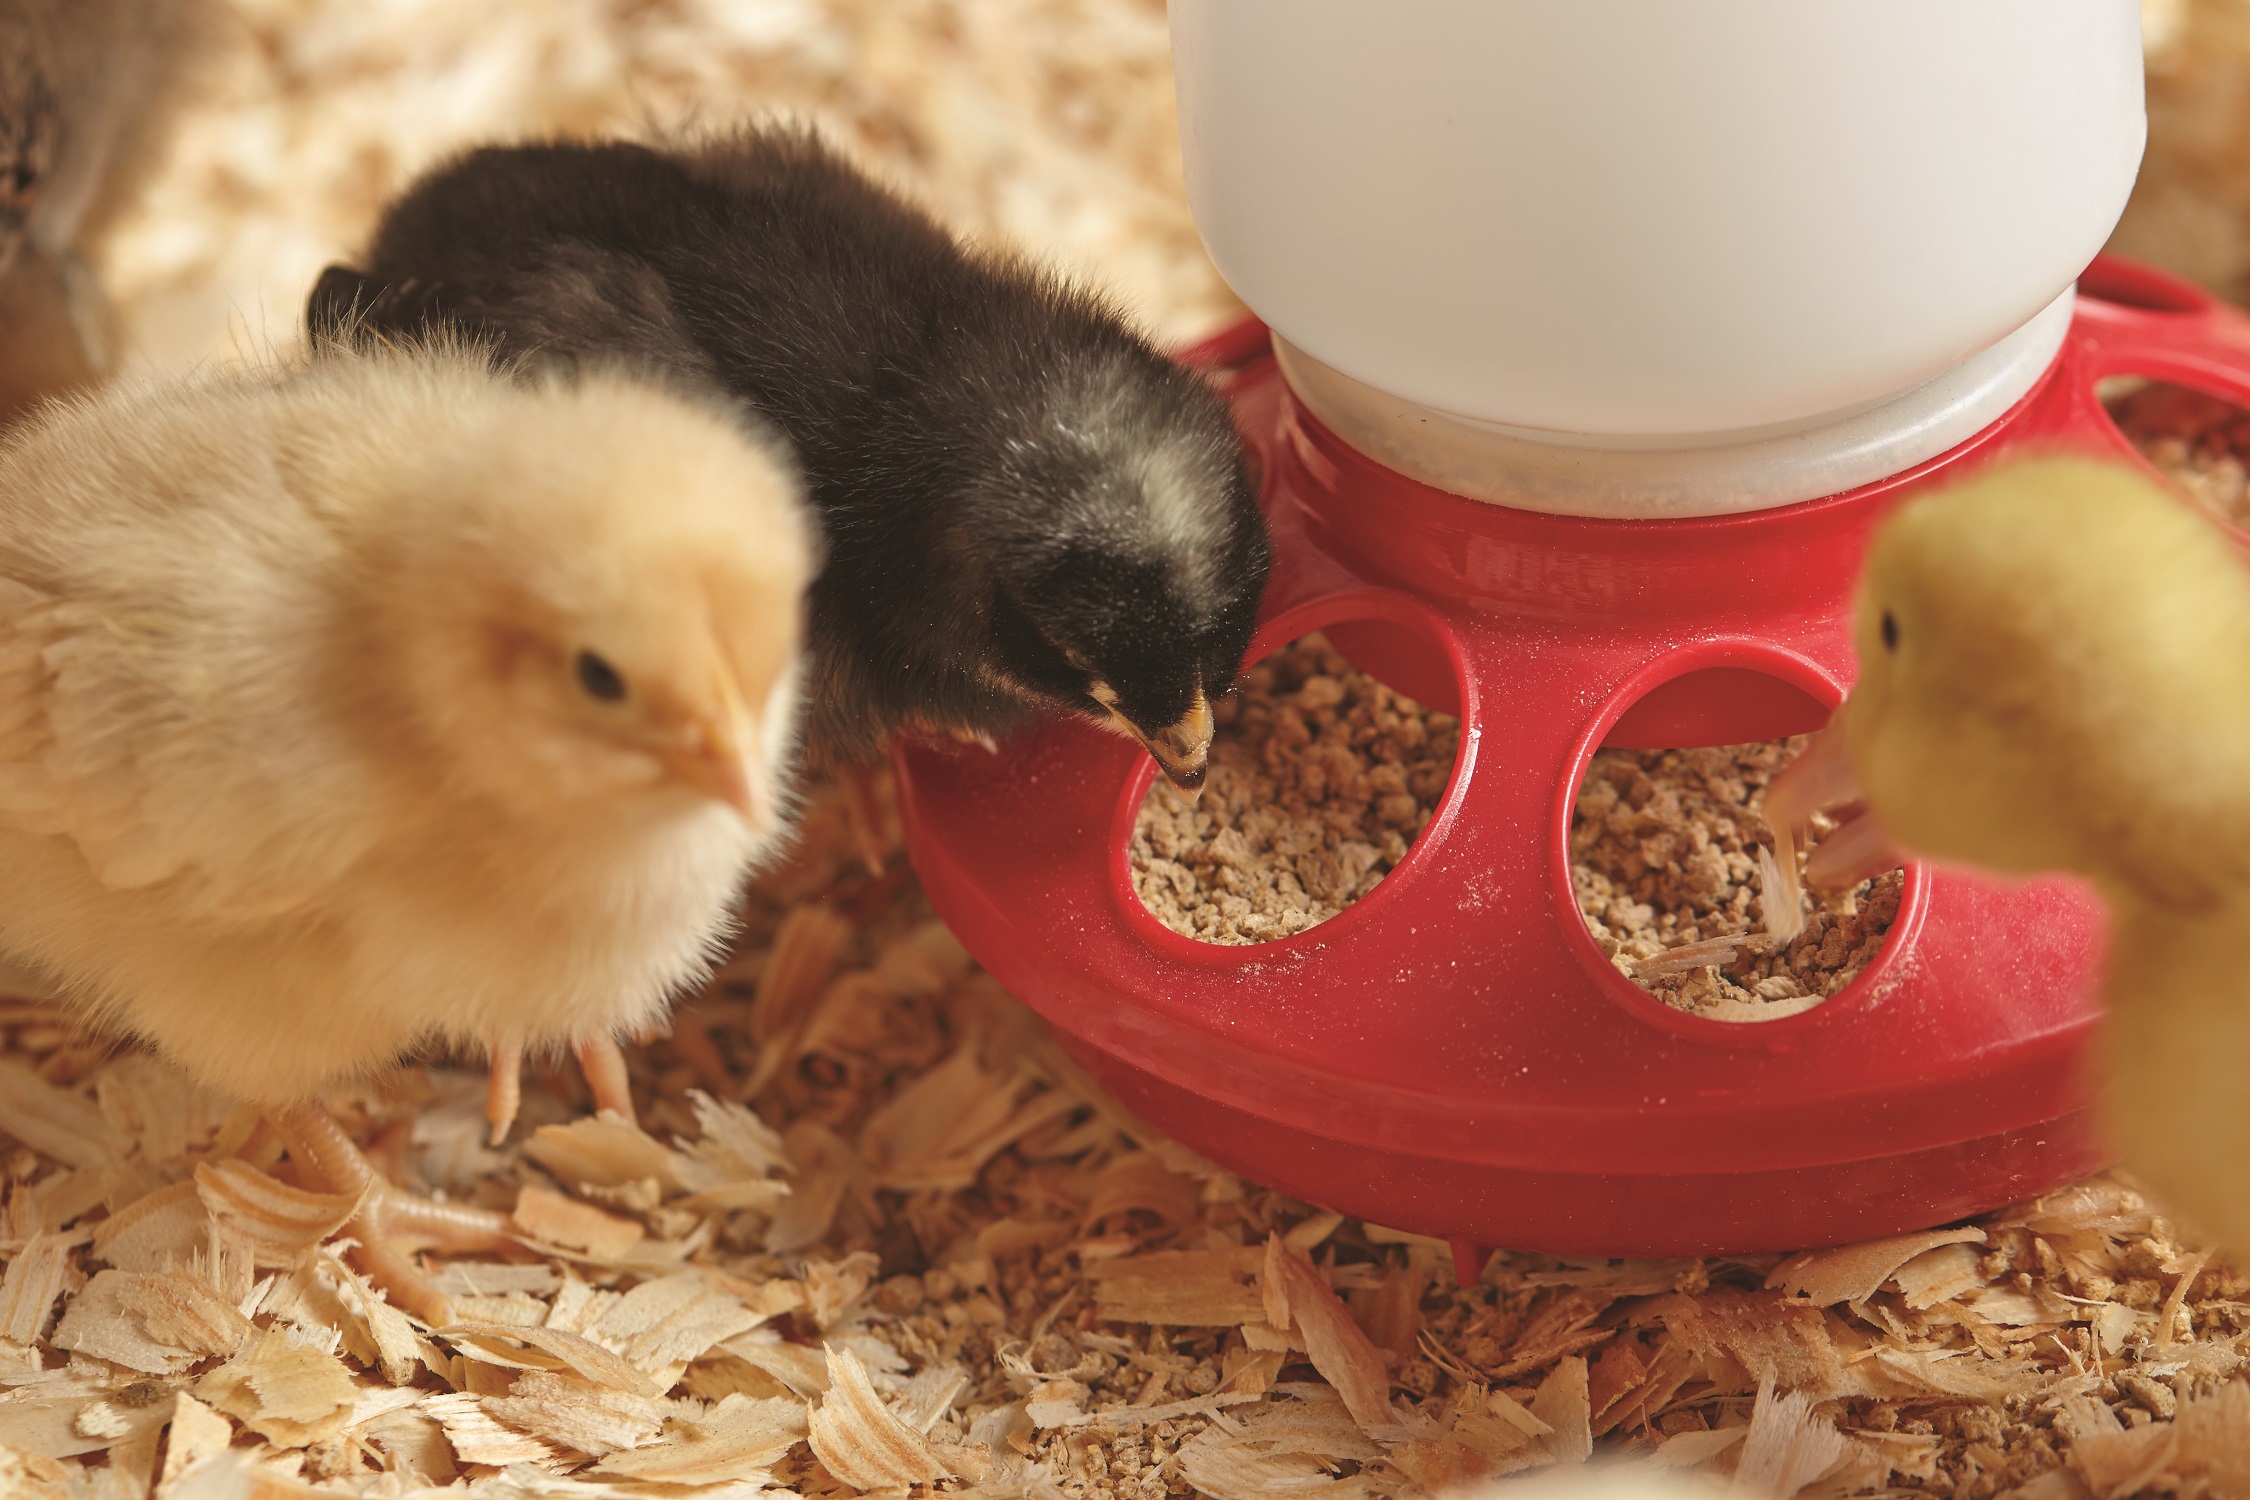 Spring Chick Days at Concord Tractor Supply Company Helps Families